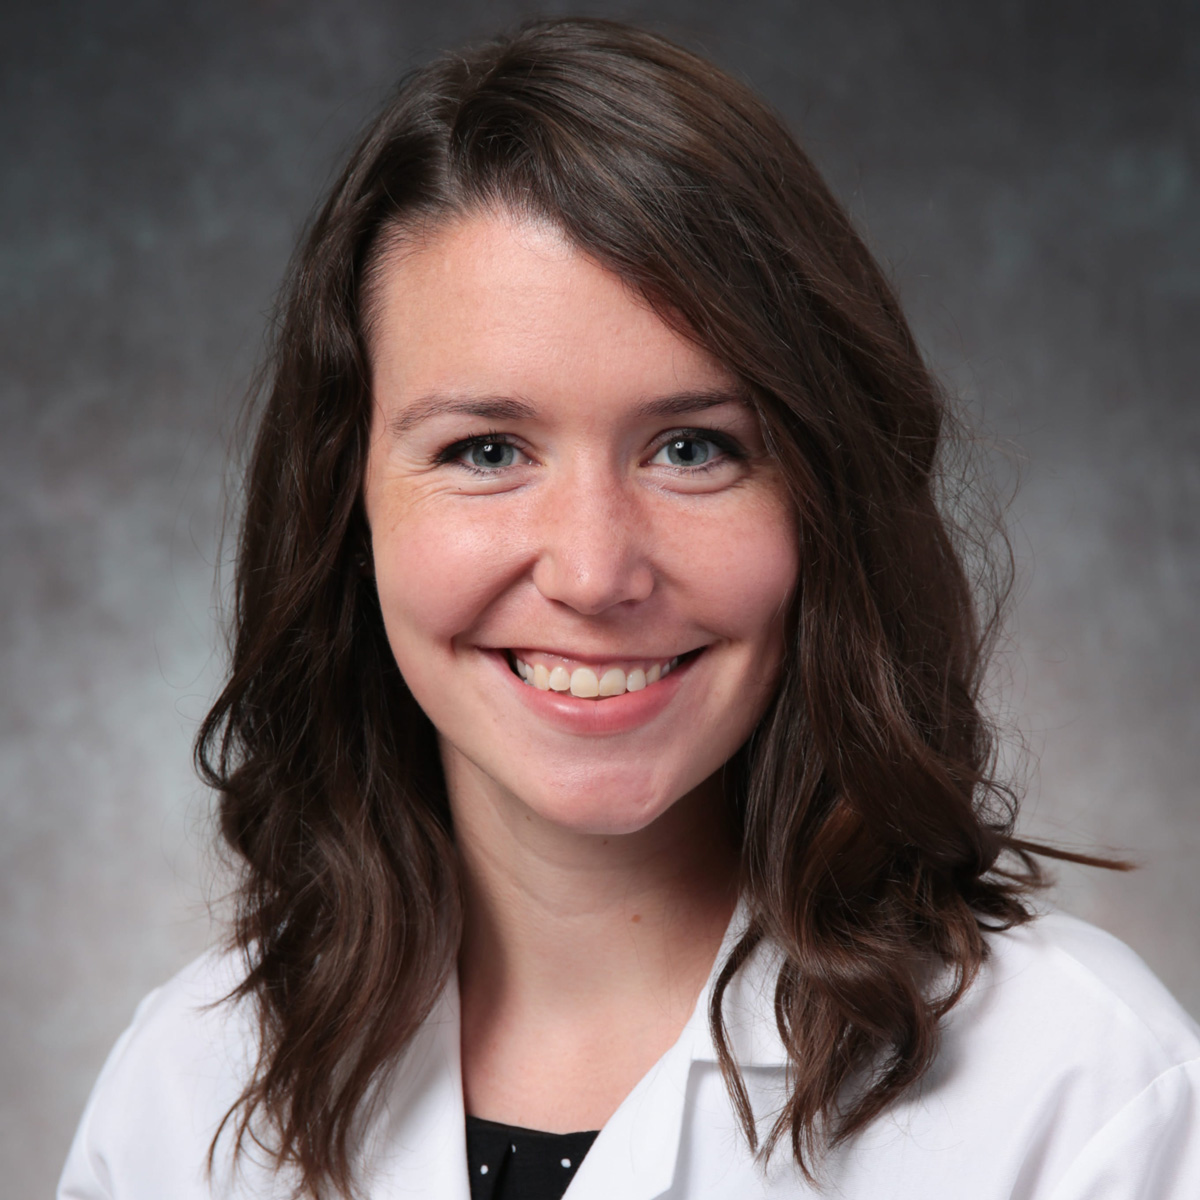 A friendly image of Aimee Kaltenbach, MD